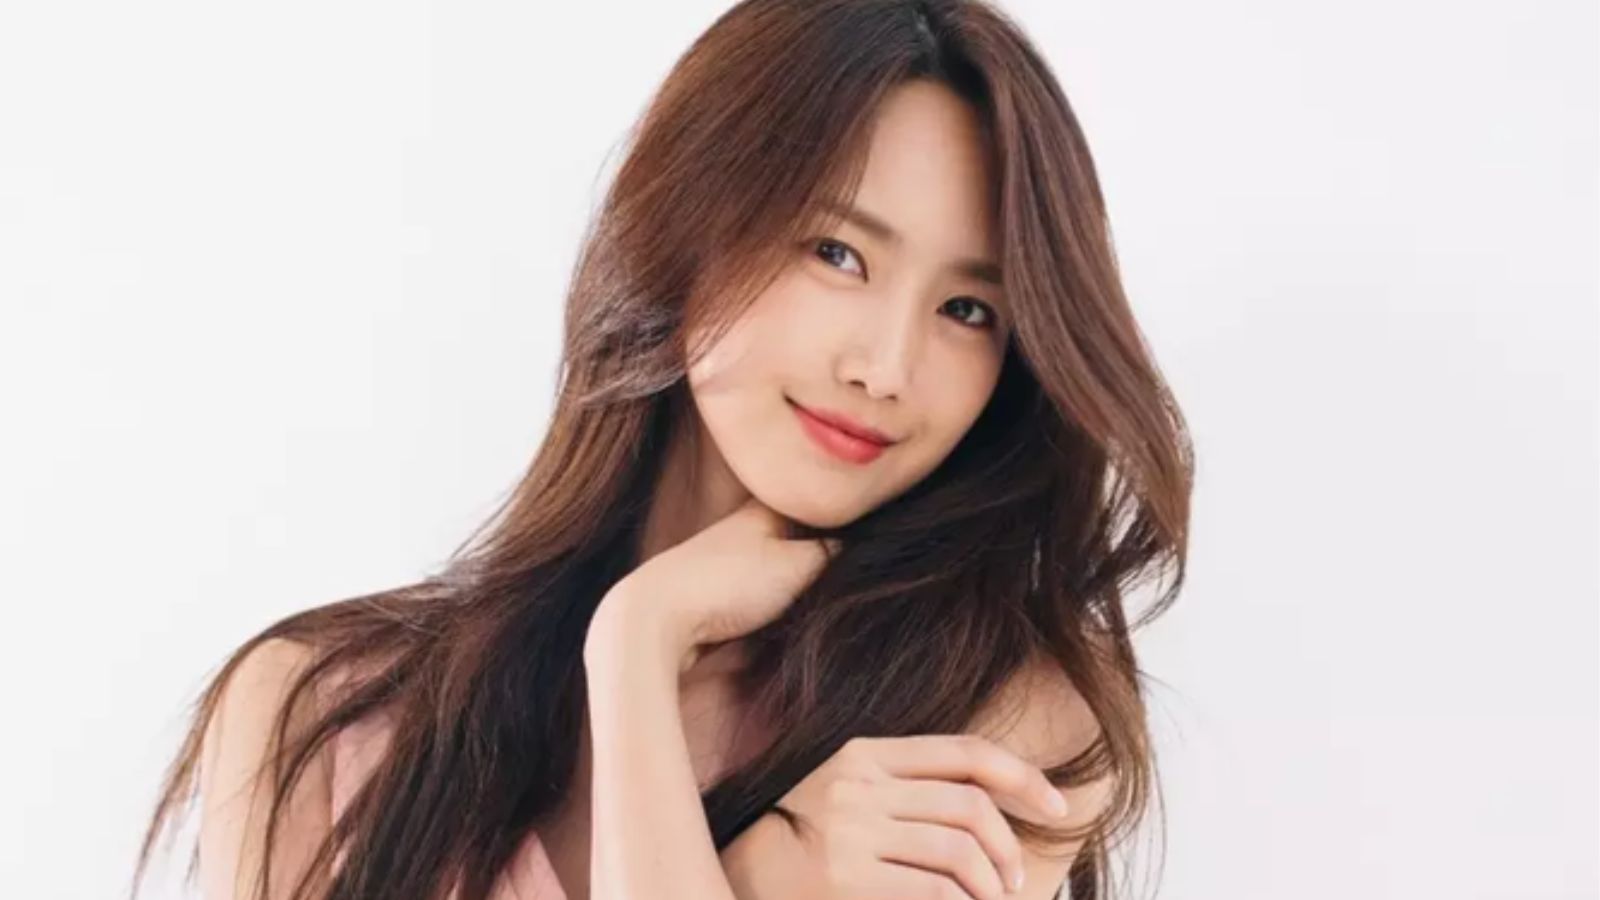 Jung Joo Yeon announces divorce after six months of marriage | Entertainment-others News